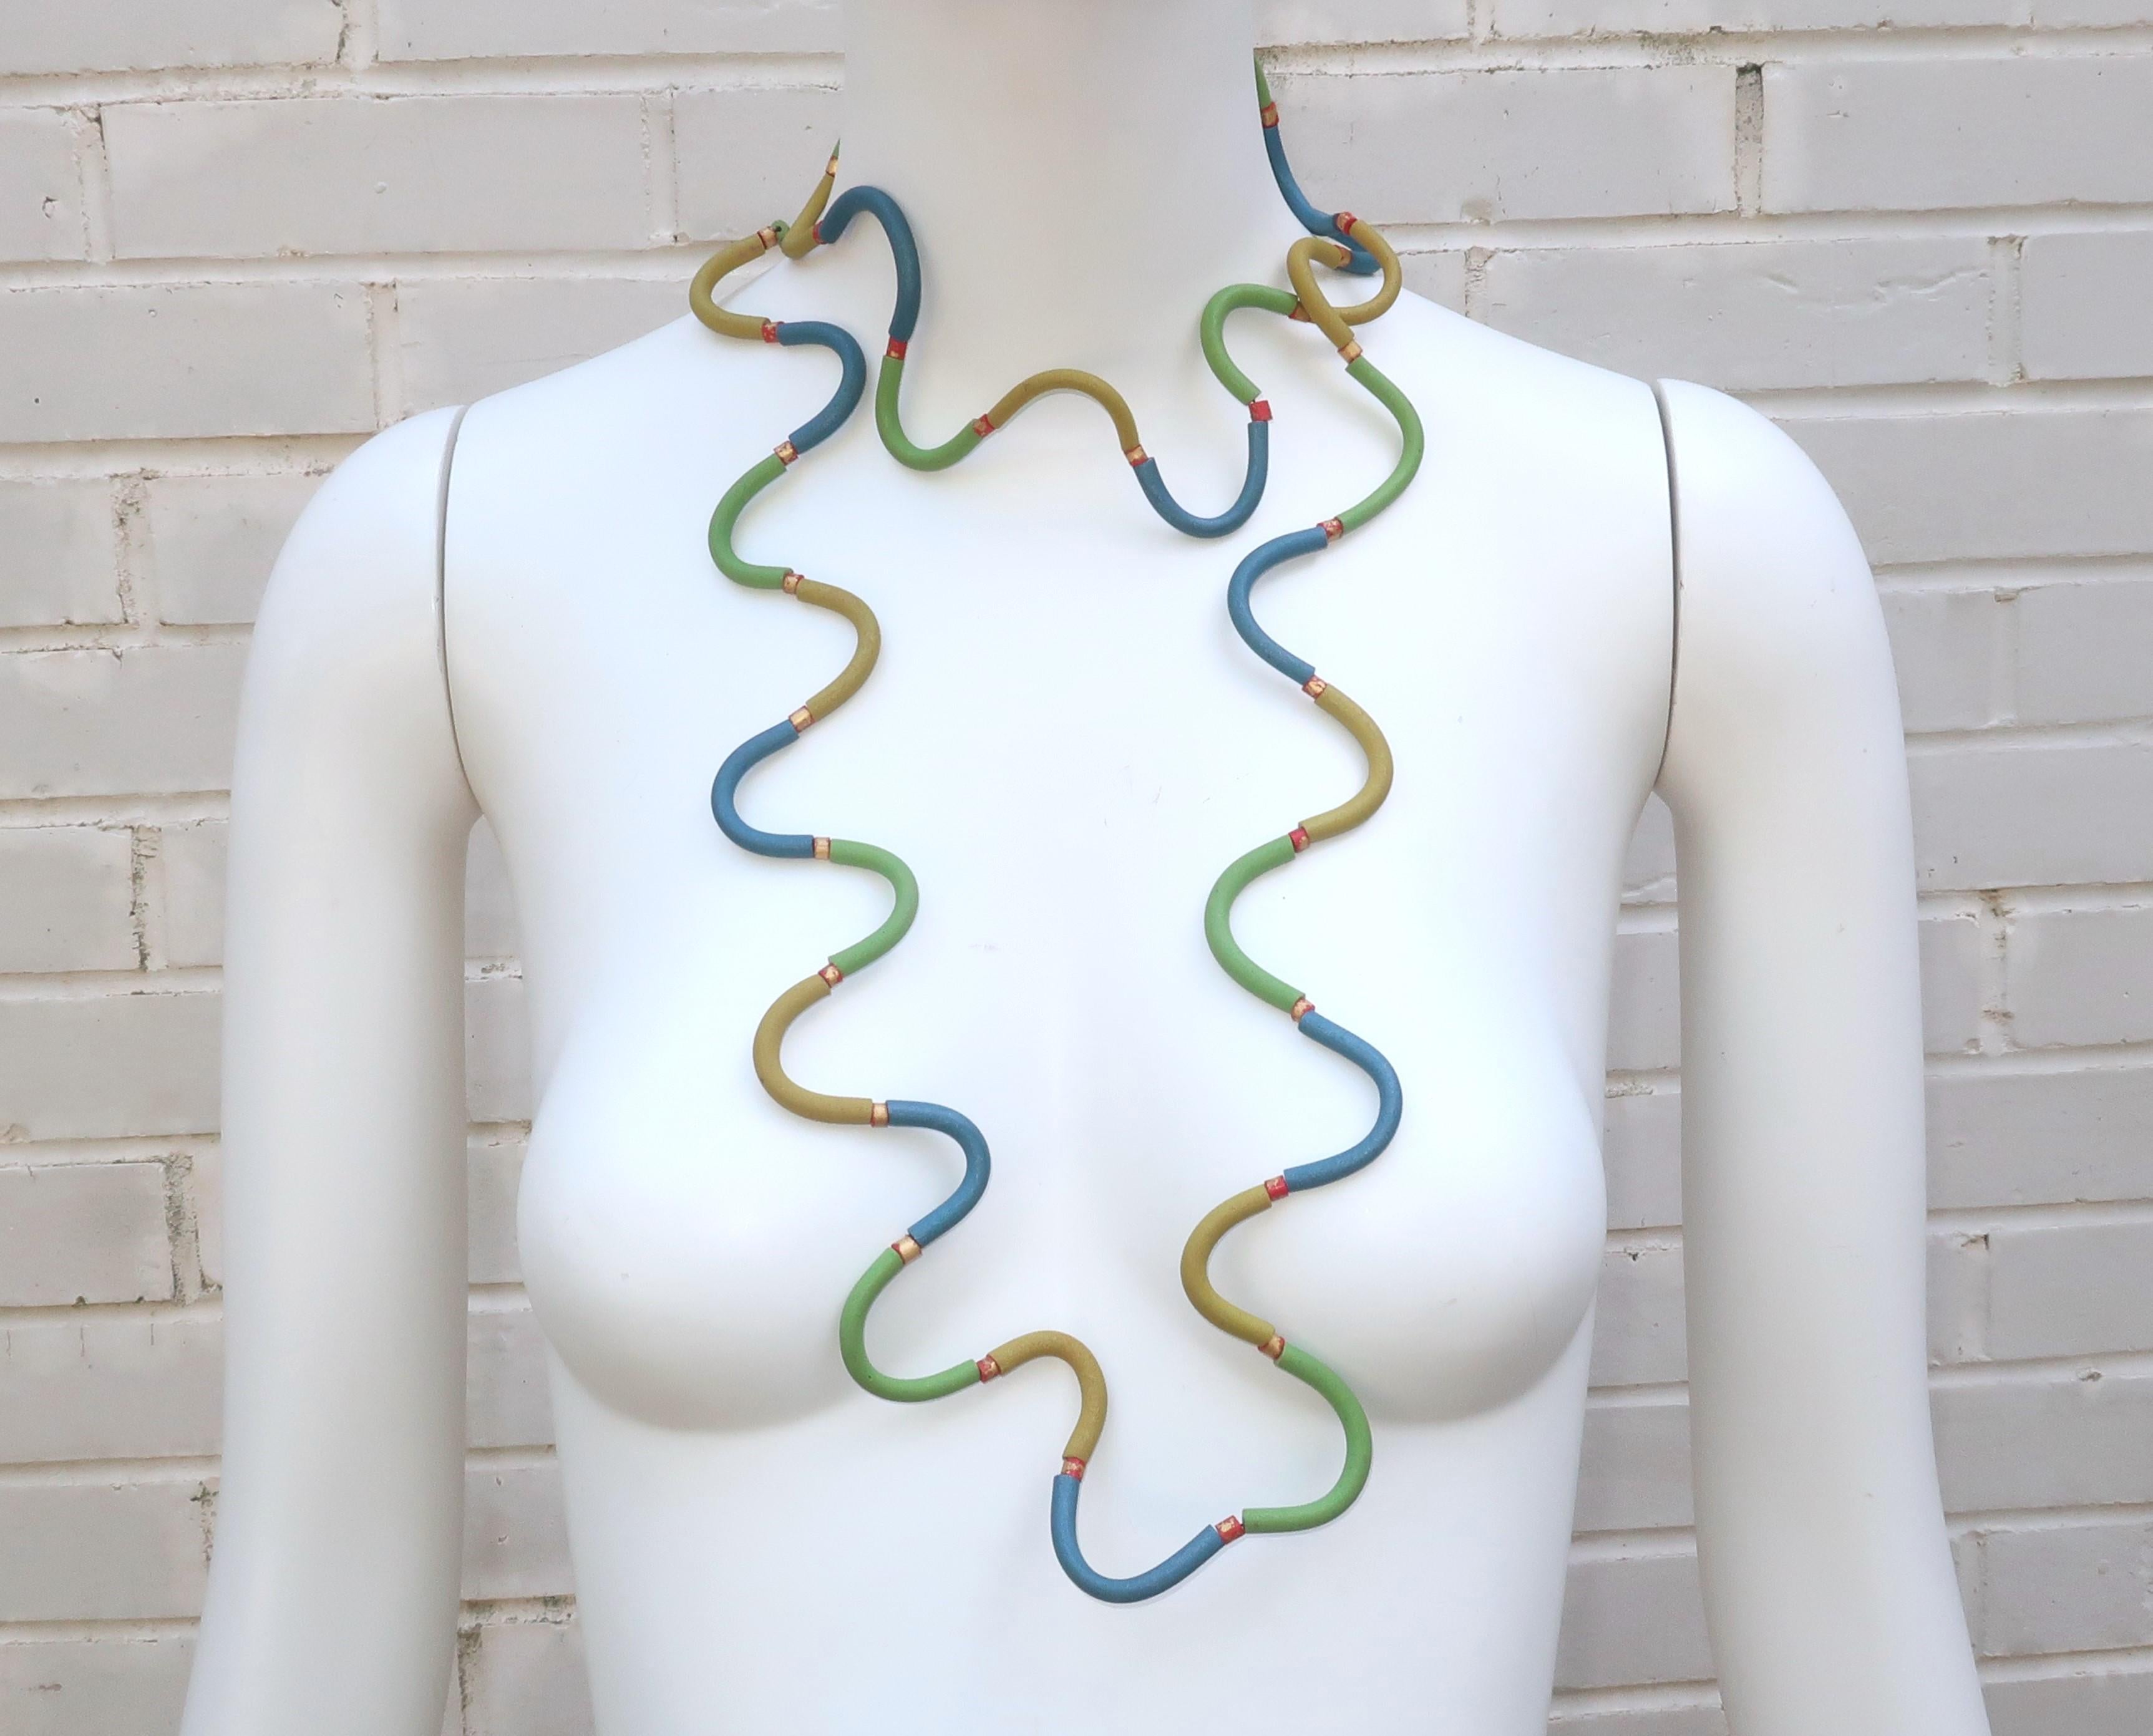 Ford & Forlano Sculptural Squiggle Bead Necklace, 1980's In Good Condition For Sale In Atlanta, GA